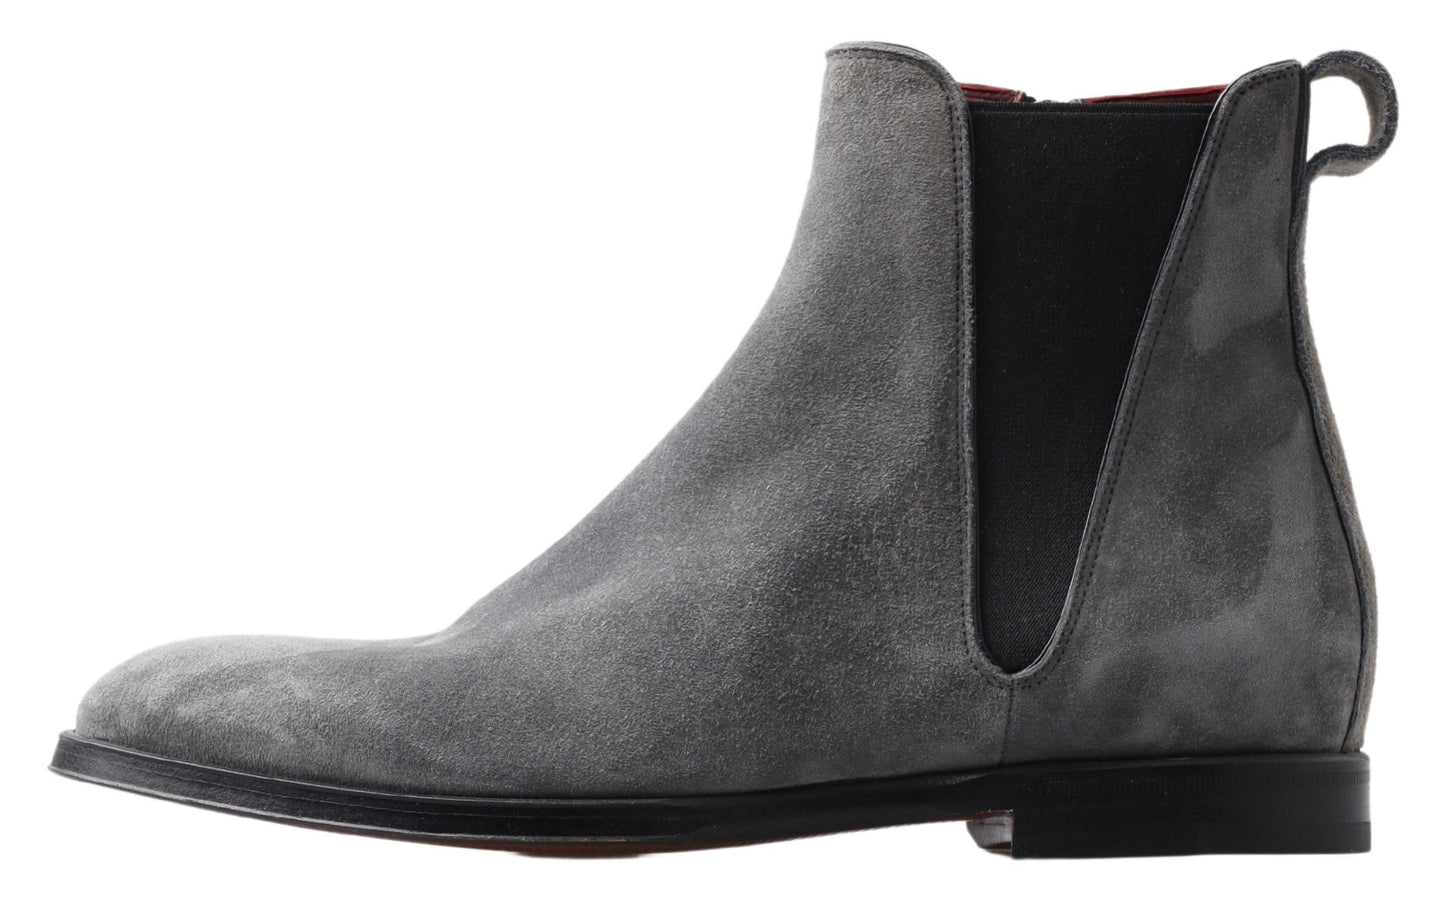 Dolce & Gabbana Gray Leather Men Ankle Boots Shoes